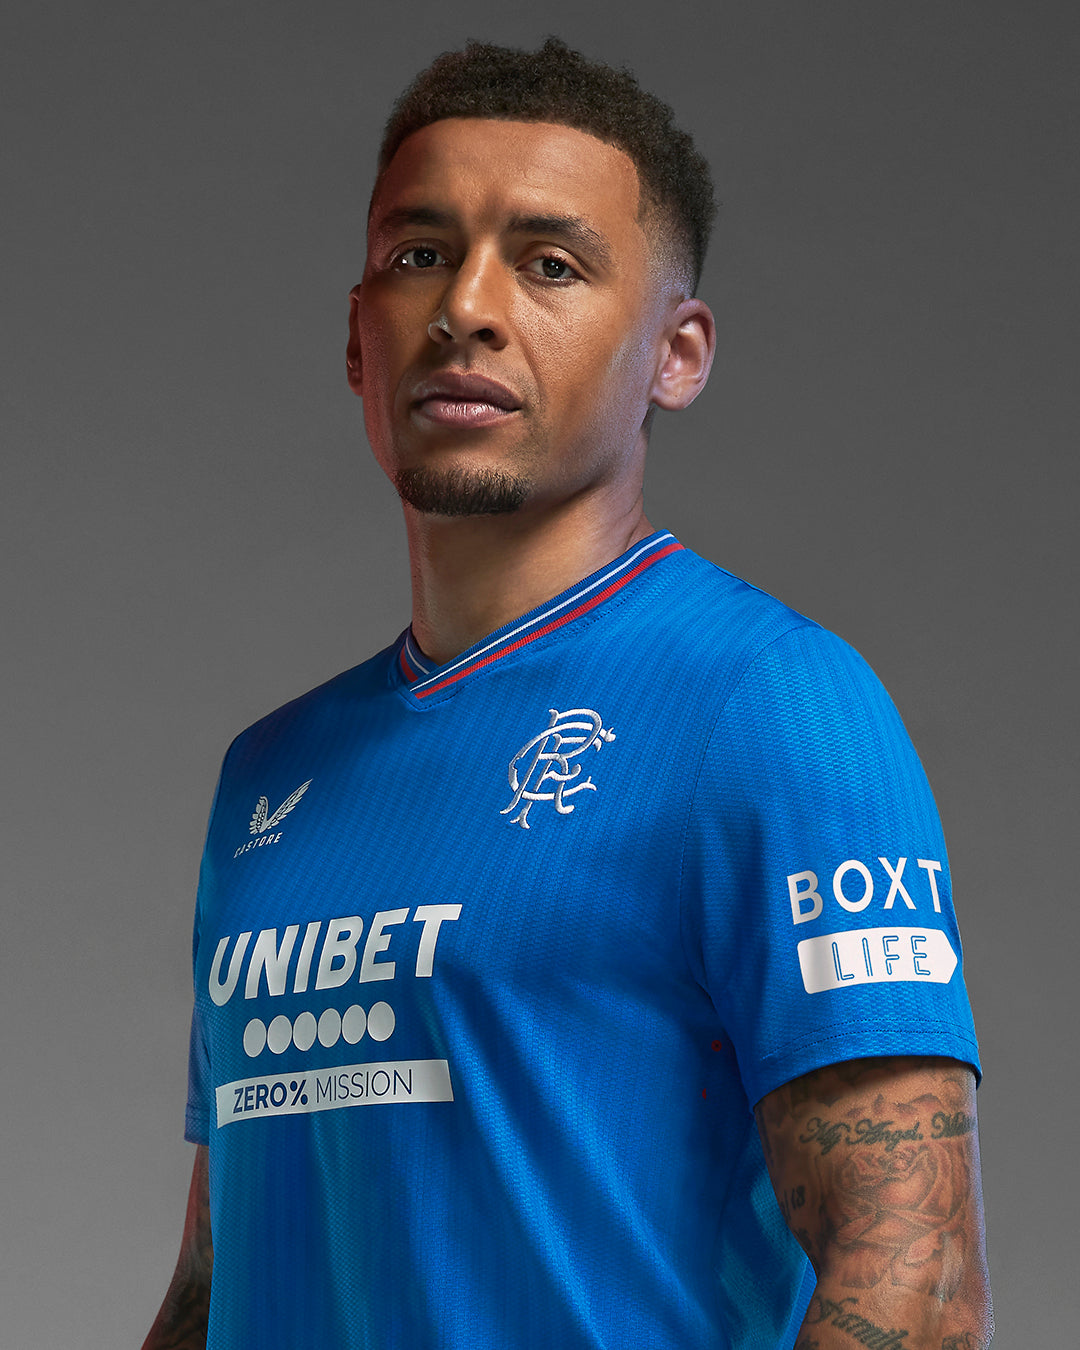 Rangers kit picture would be controversial 23/24 Castore effort